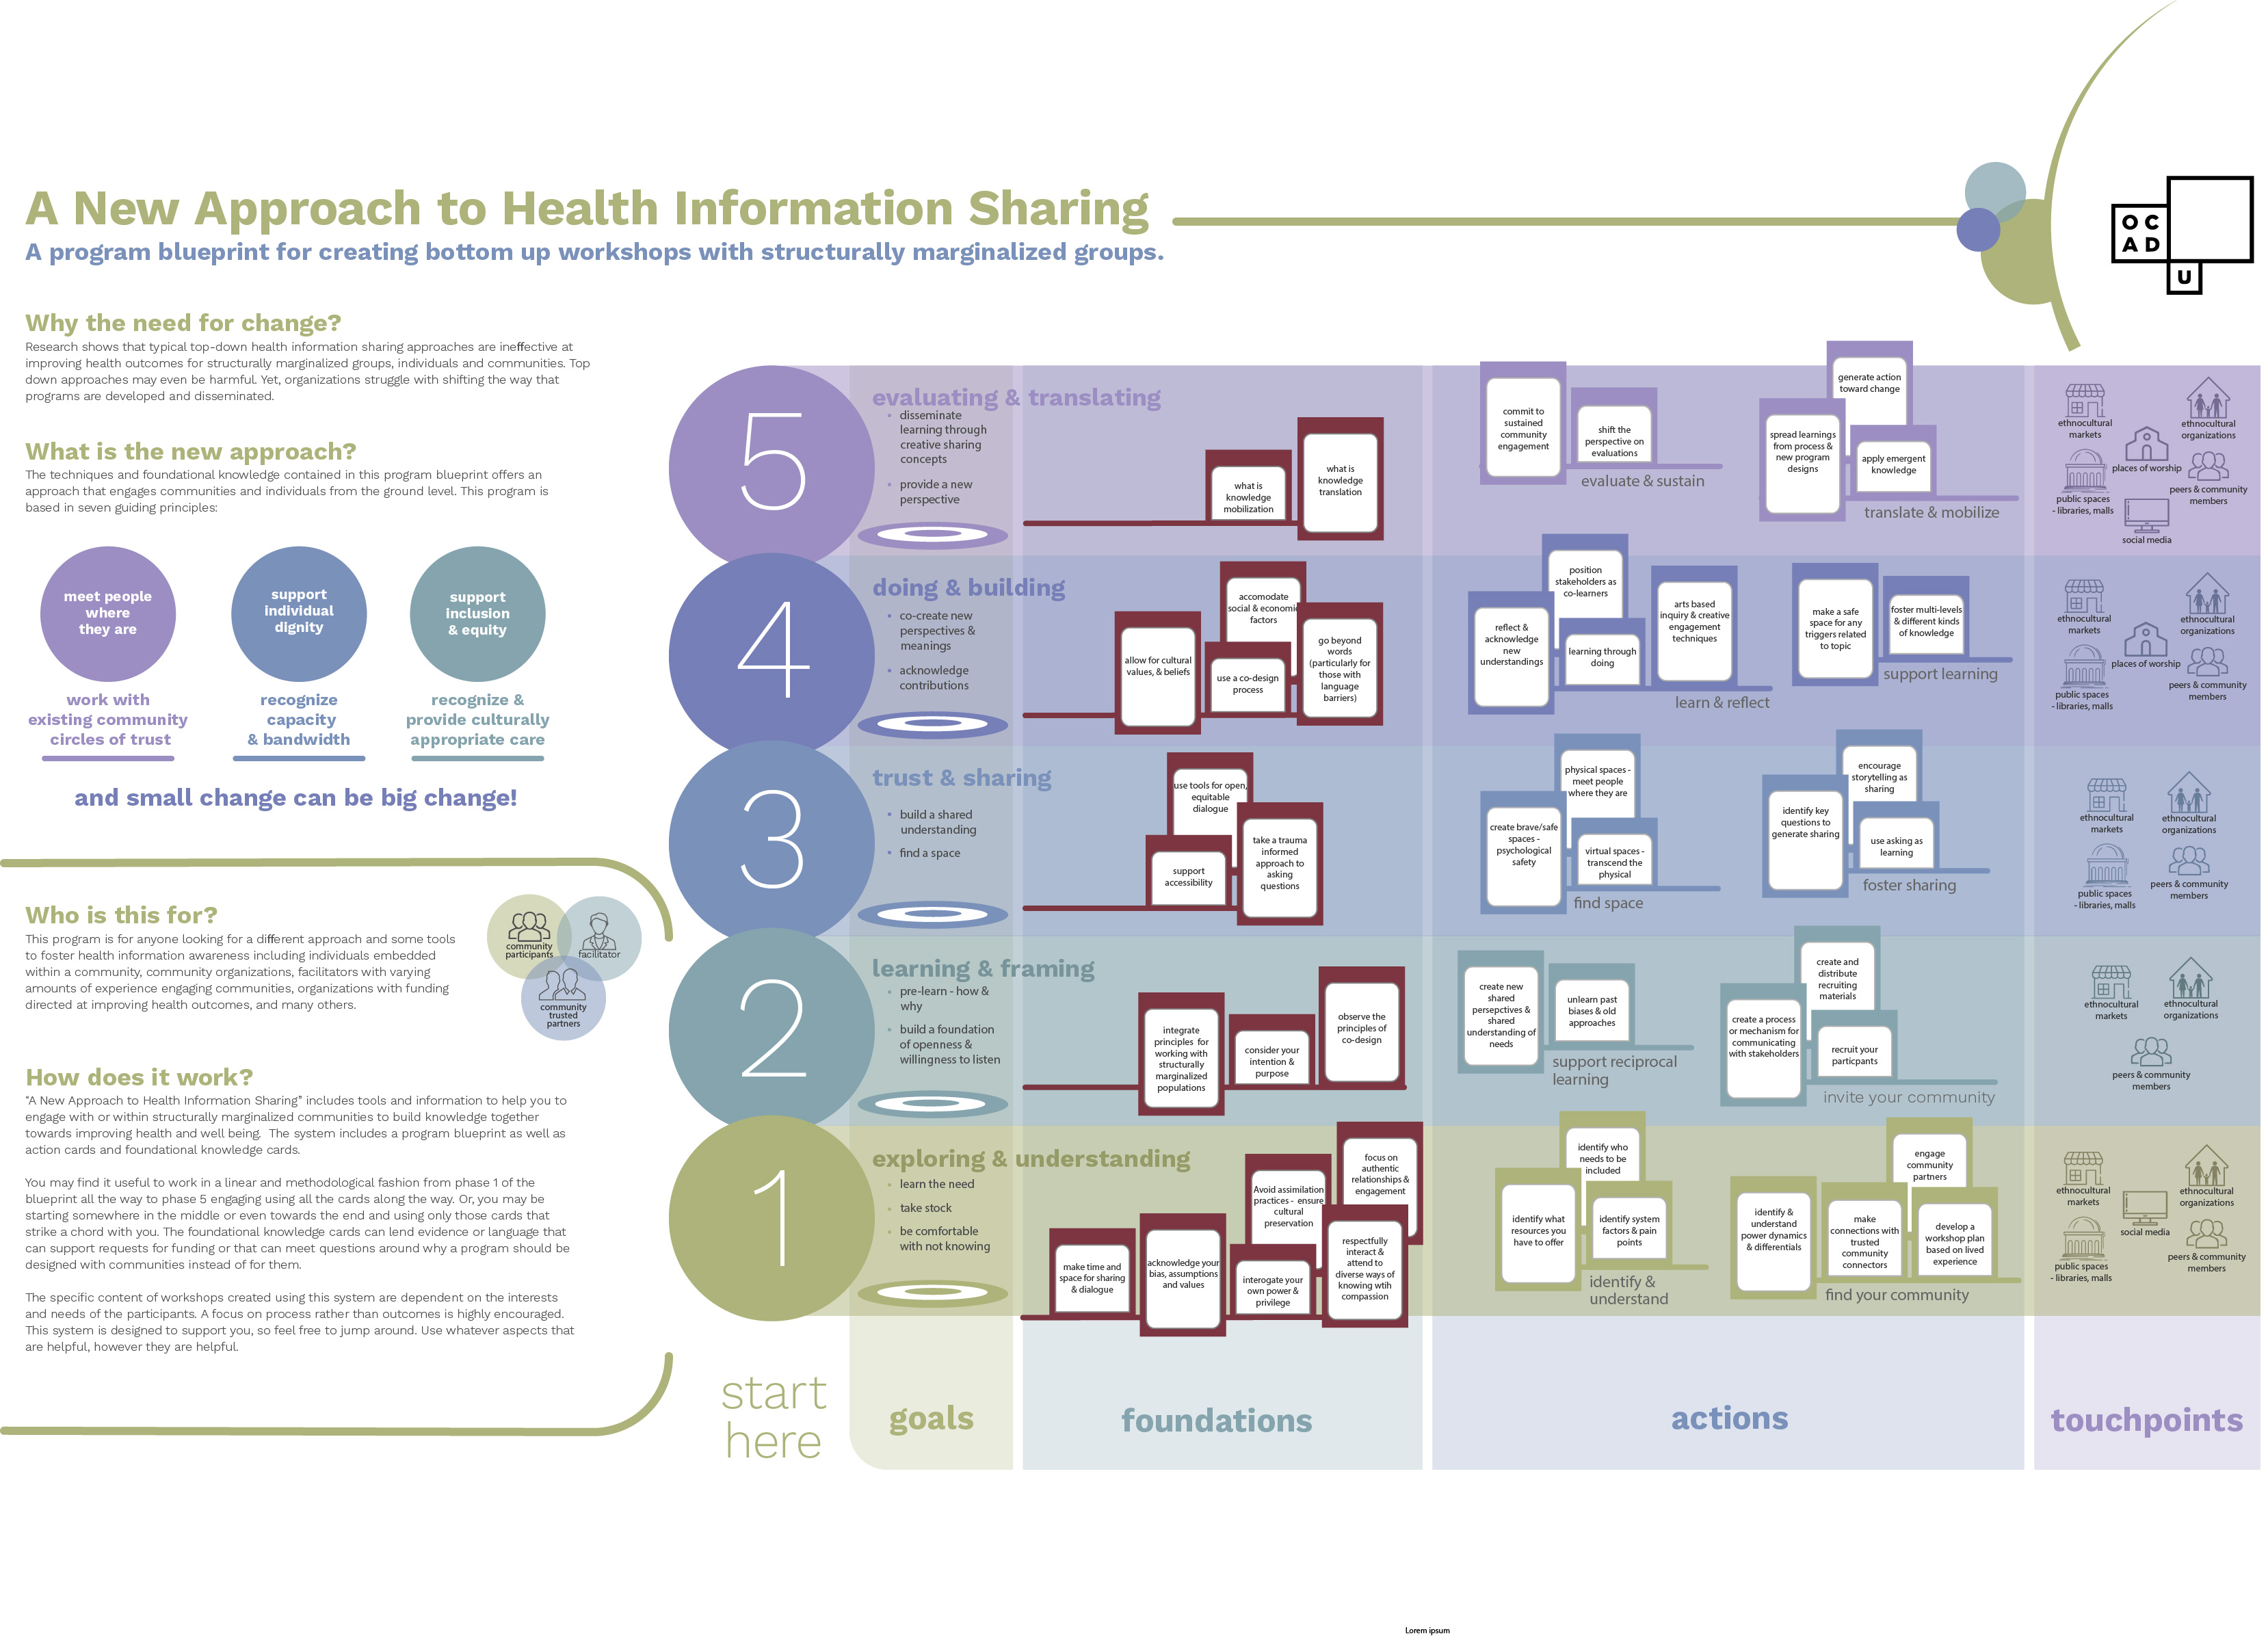 Mapping A New Approach to Health Information Sharing